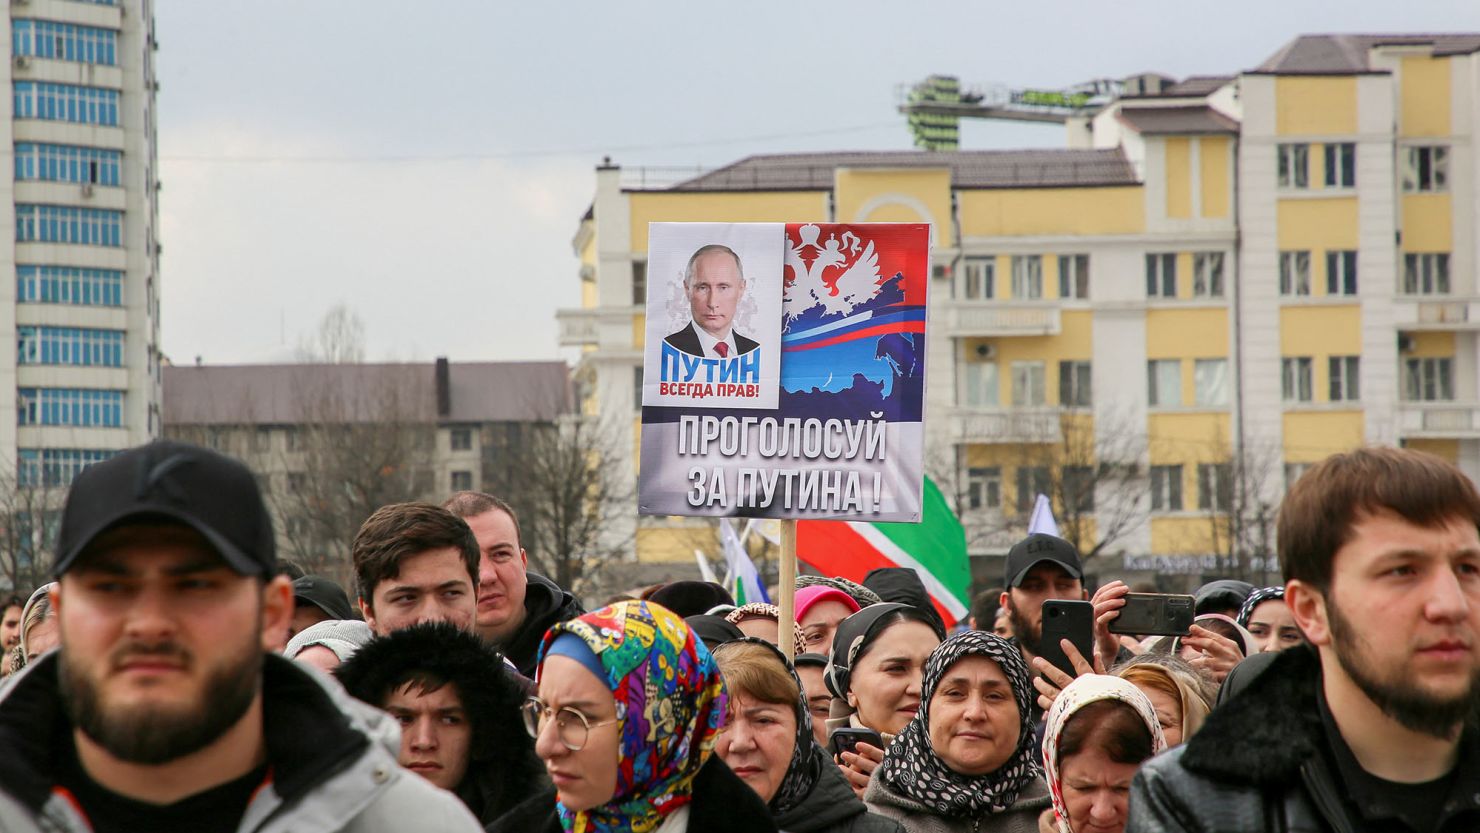 People including supporters of incumbent President Vladimir Putin take part in a procession organized on the occasion of the upcoming election, in the Chechen capital Grozny, Russia, March 10, 2024.